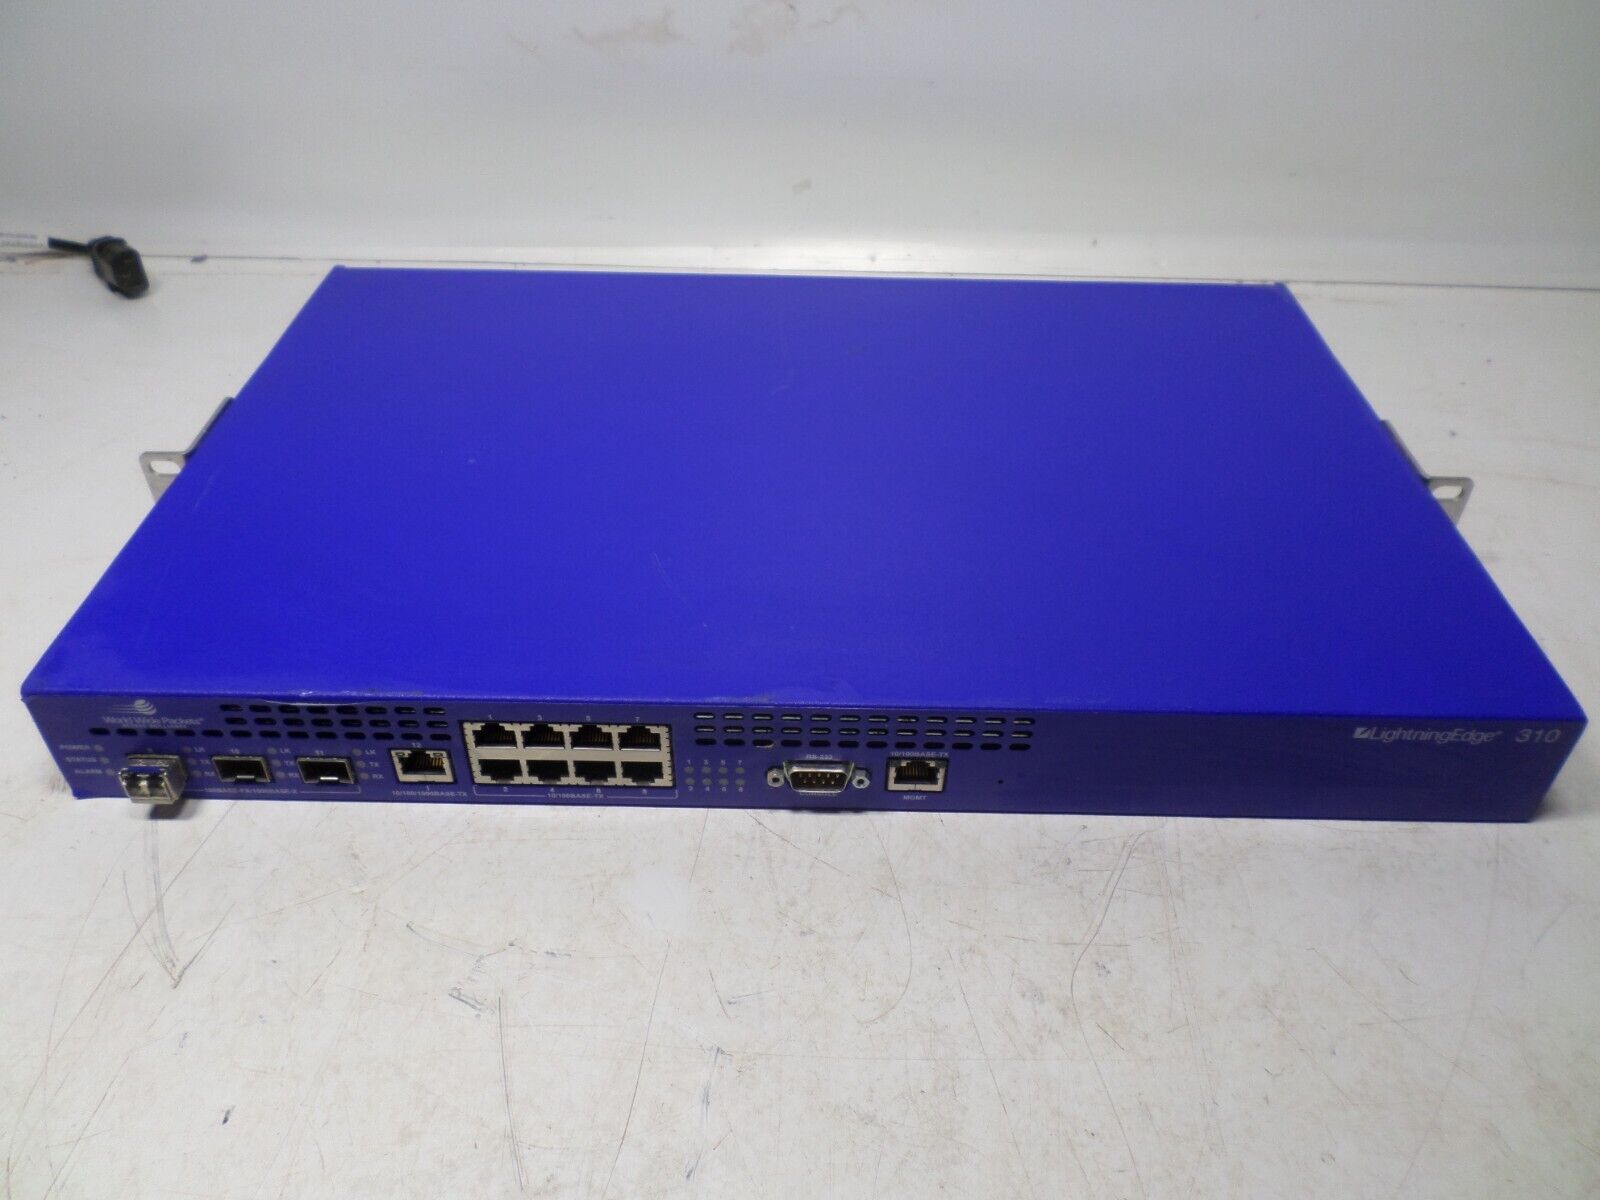 LE-310 World Wide Packets LEAC-0310AB Lightning Edge 310 Ciena Switch + 1x SFP